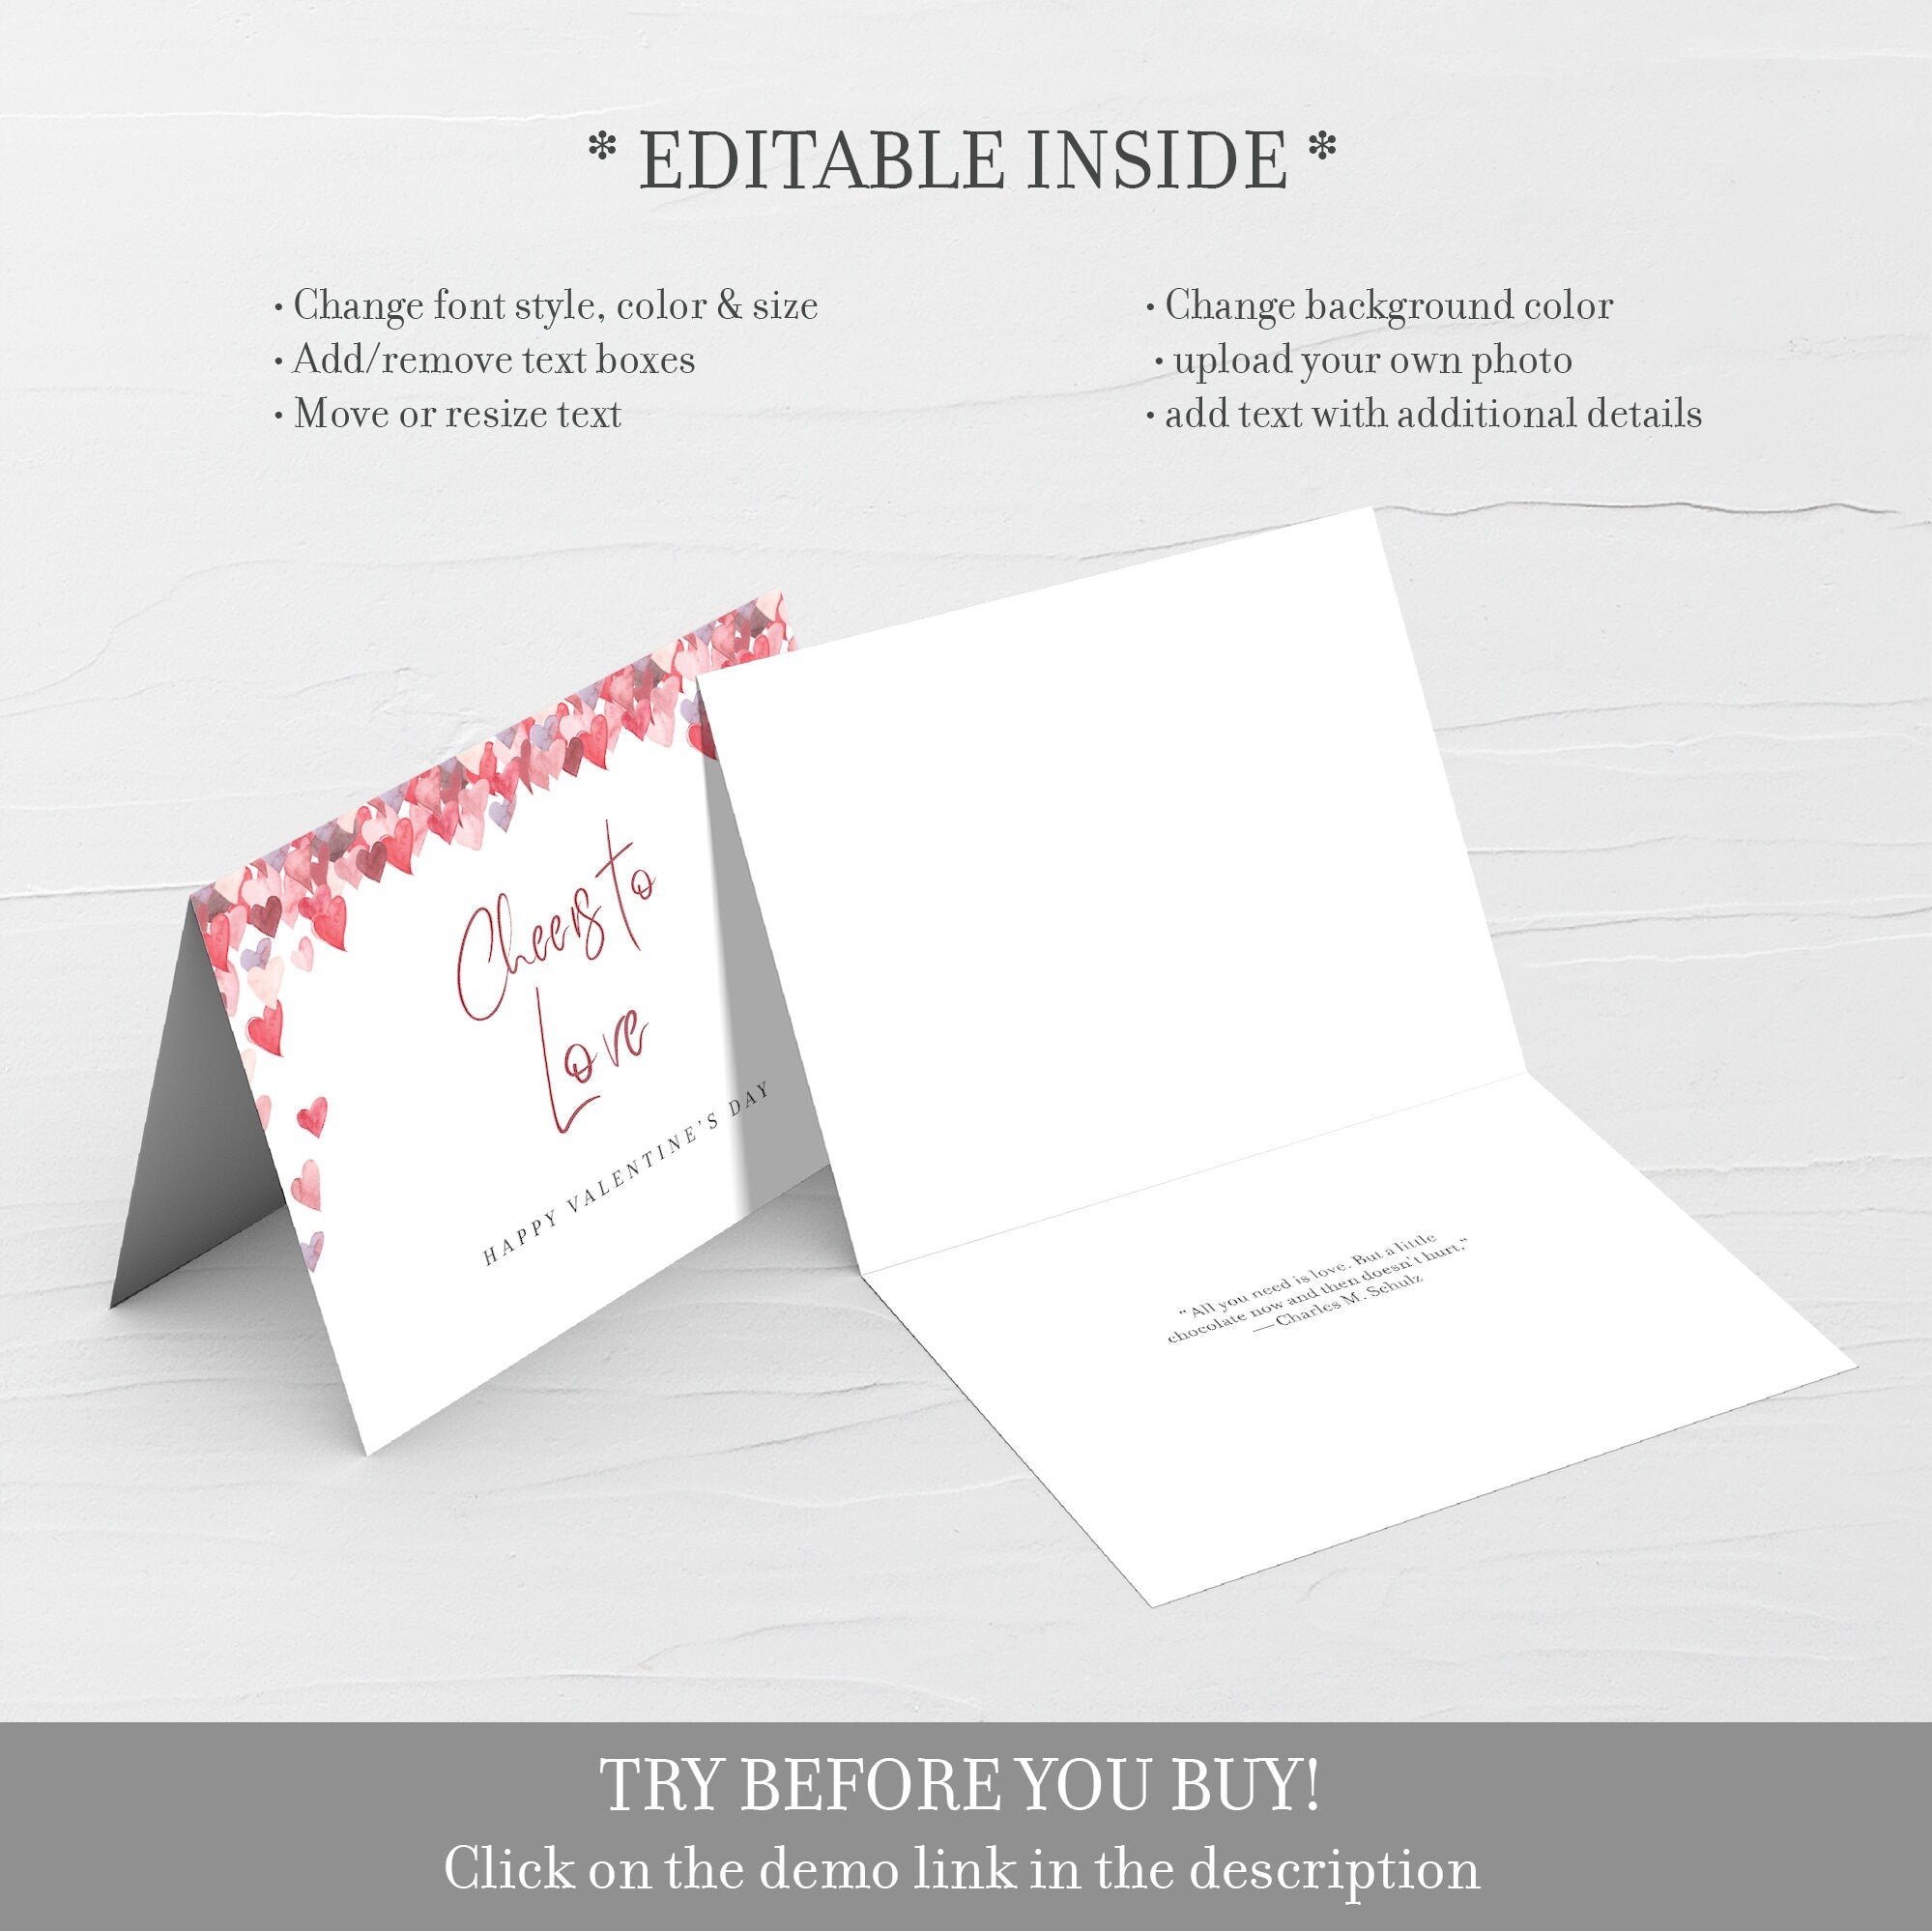 Printable Valentines Card Template, Happy Valentines Day Card, Editable Cheers To Love, Valentines Card DIGITAL DOWNLOAD, A2 Size - VH100